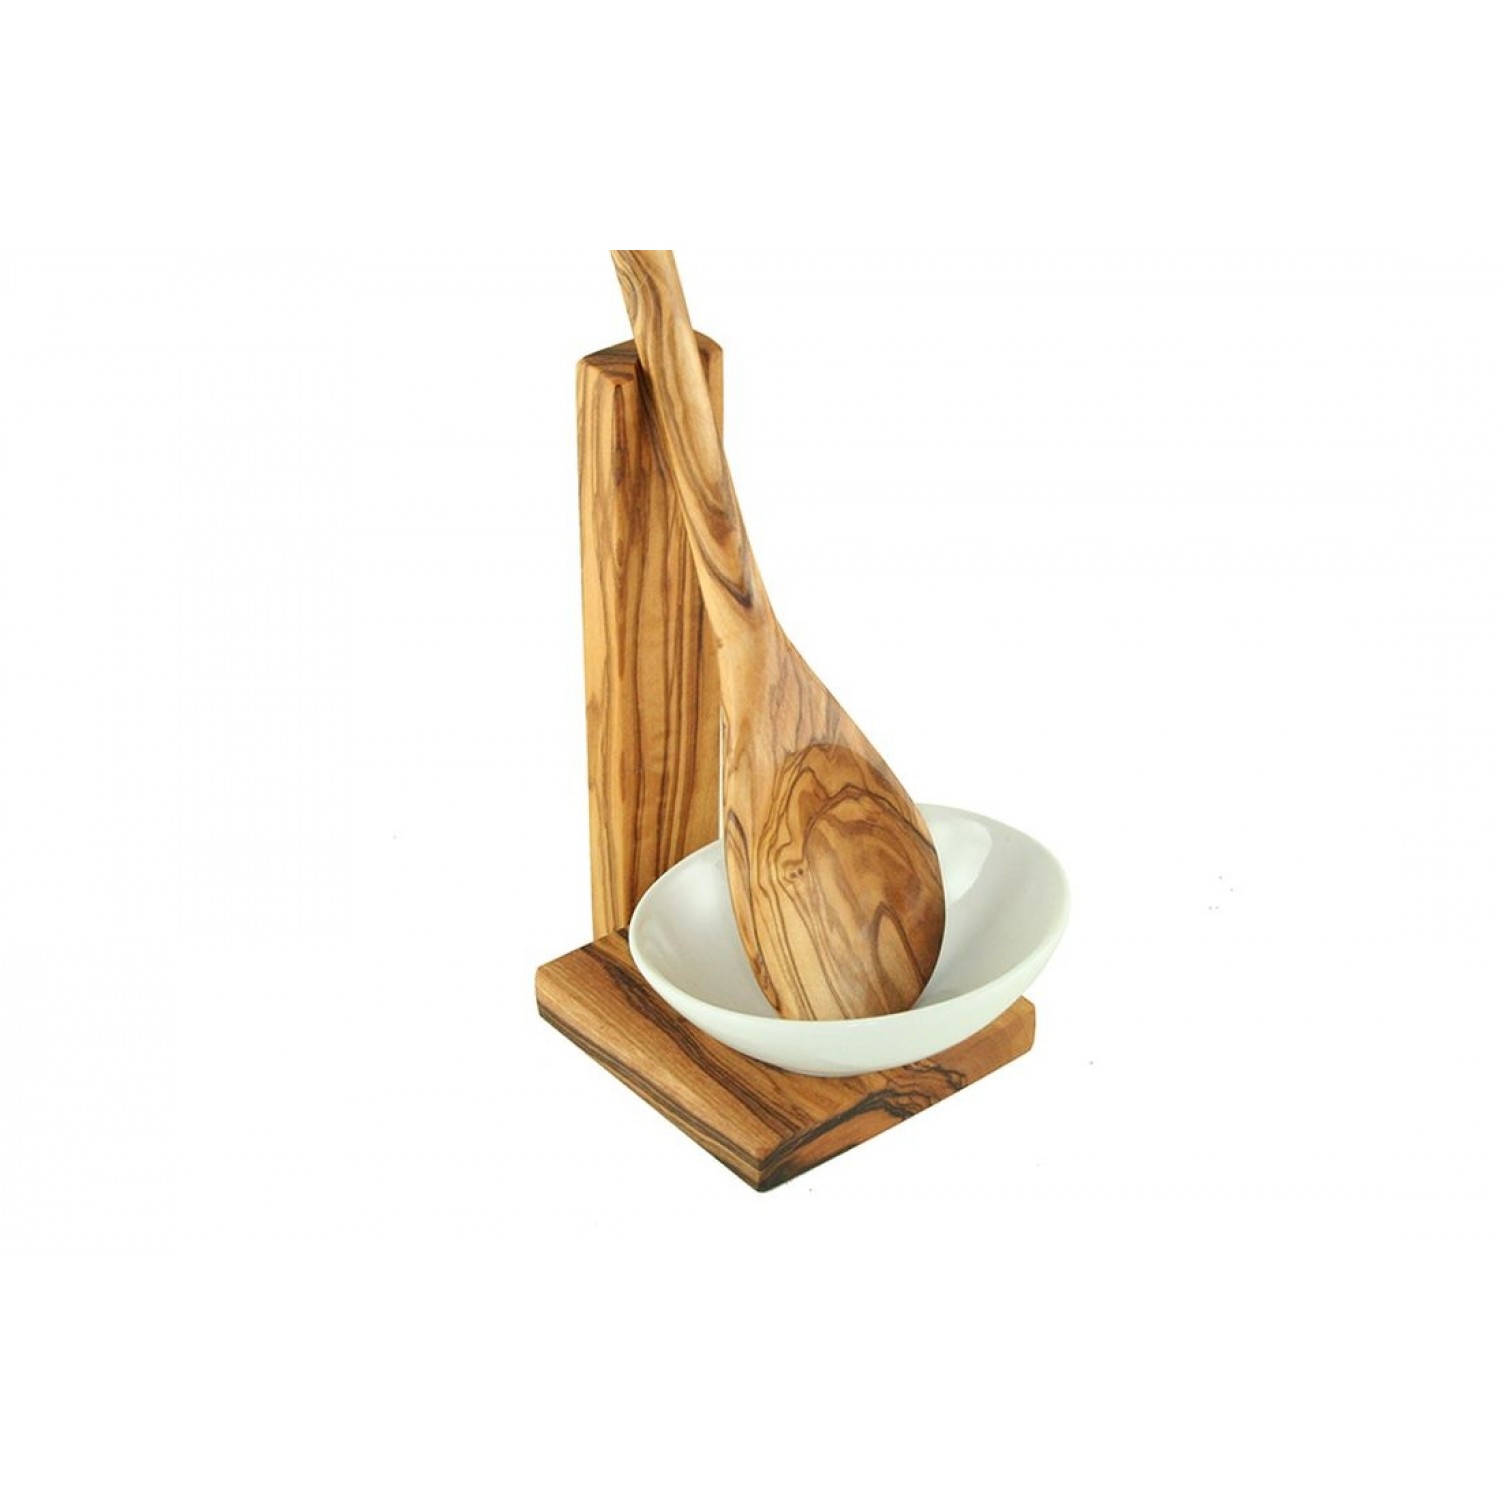 Cooking Spoon Holder - Olive Wood, with Cooking Spoon & Porcelain Bowl